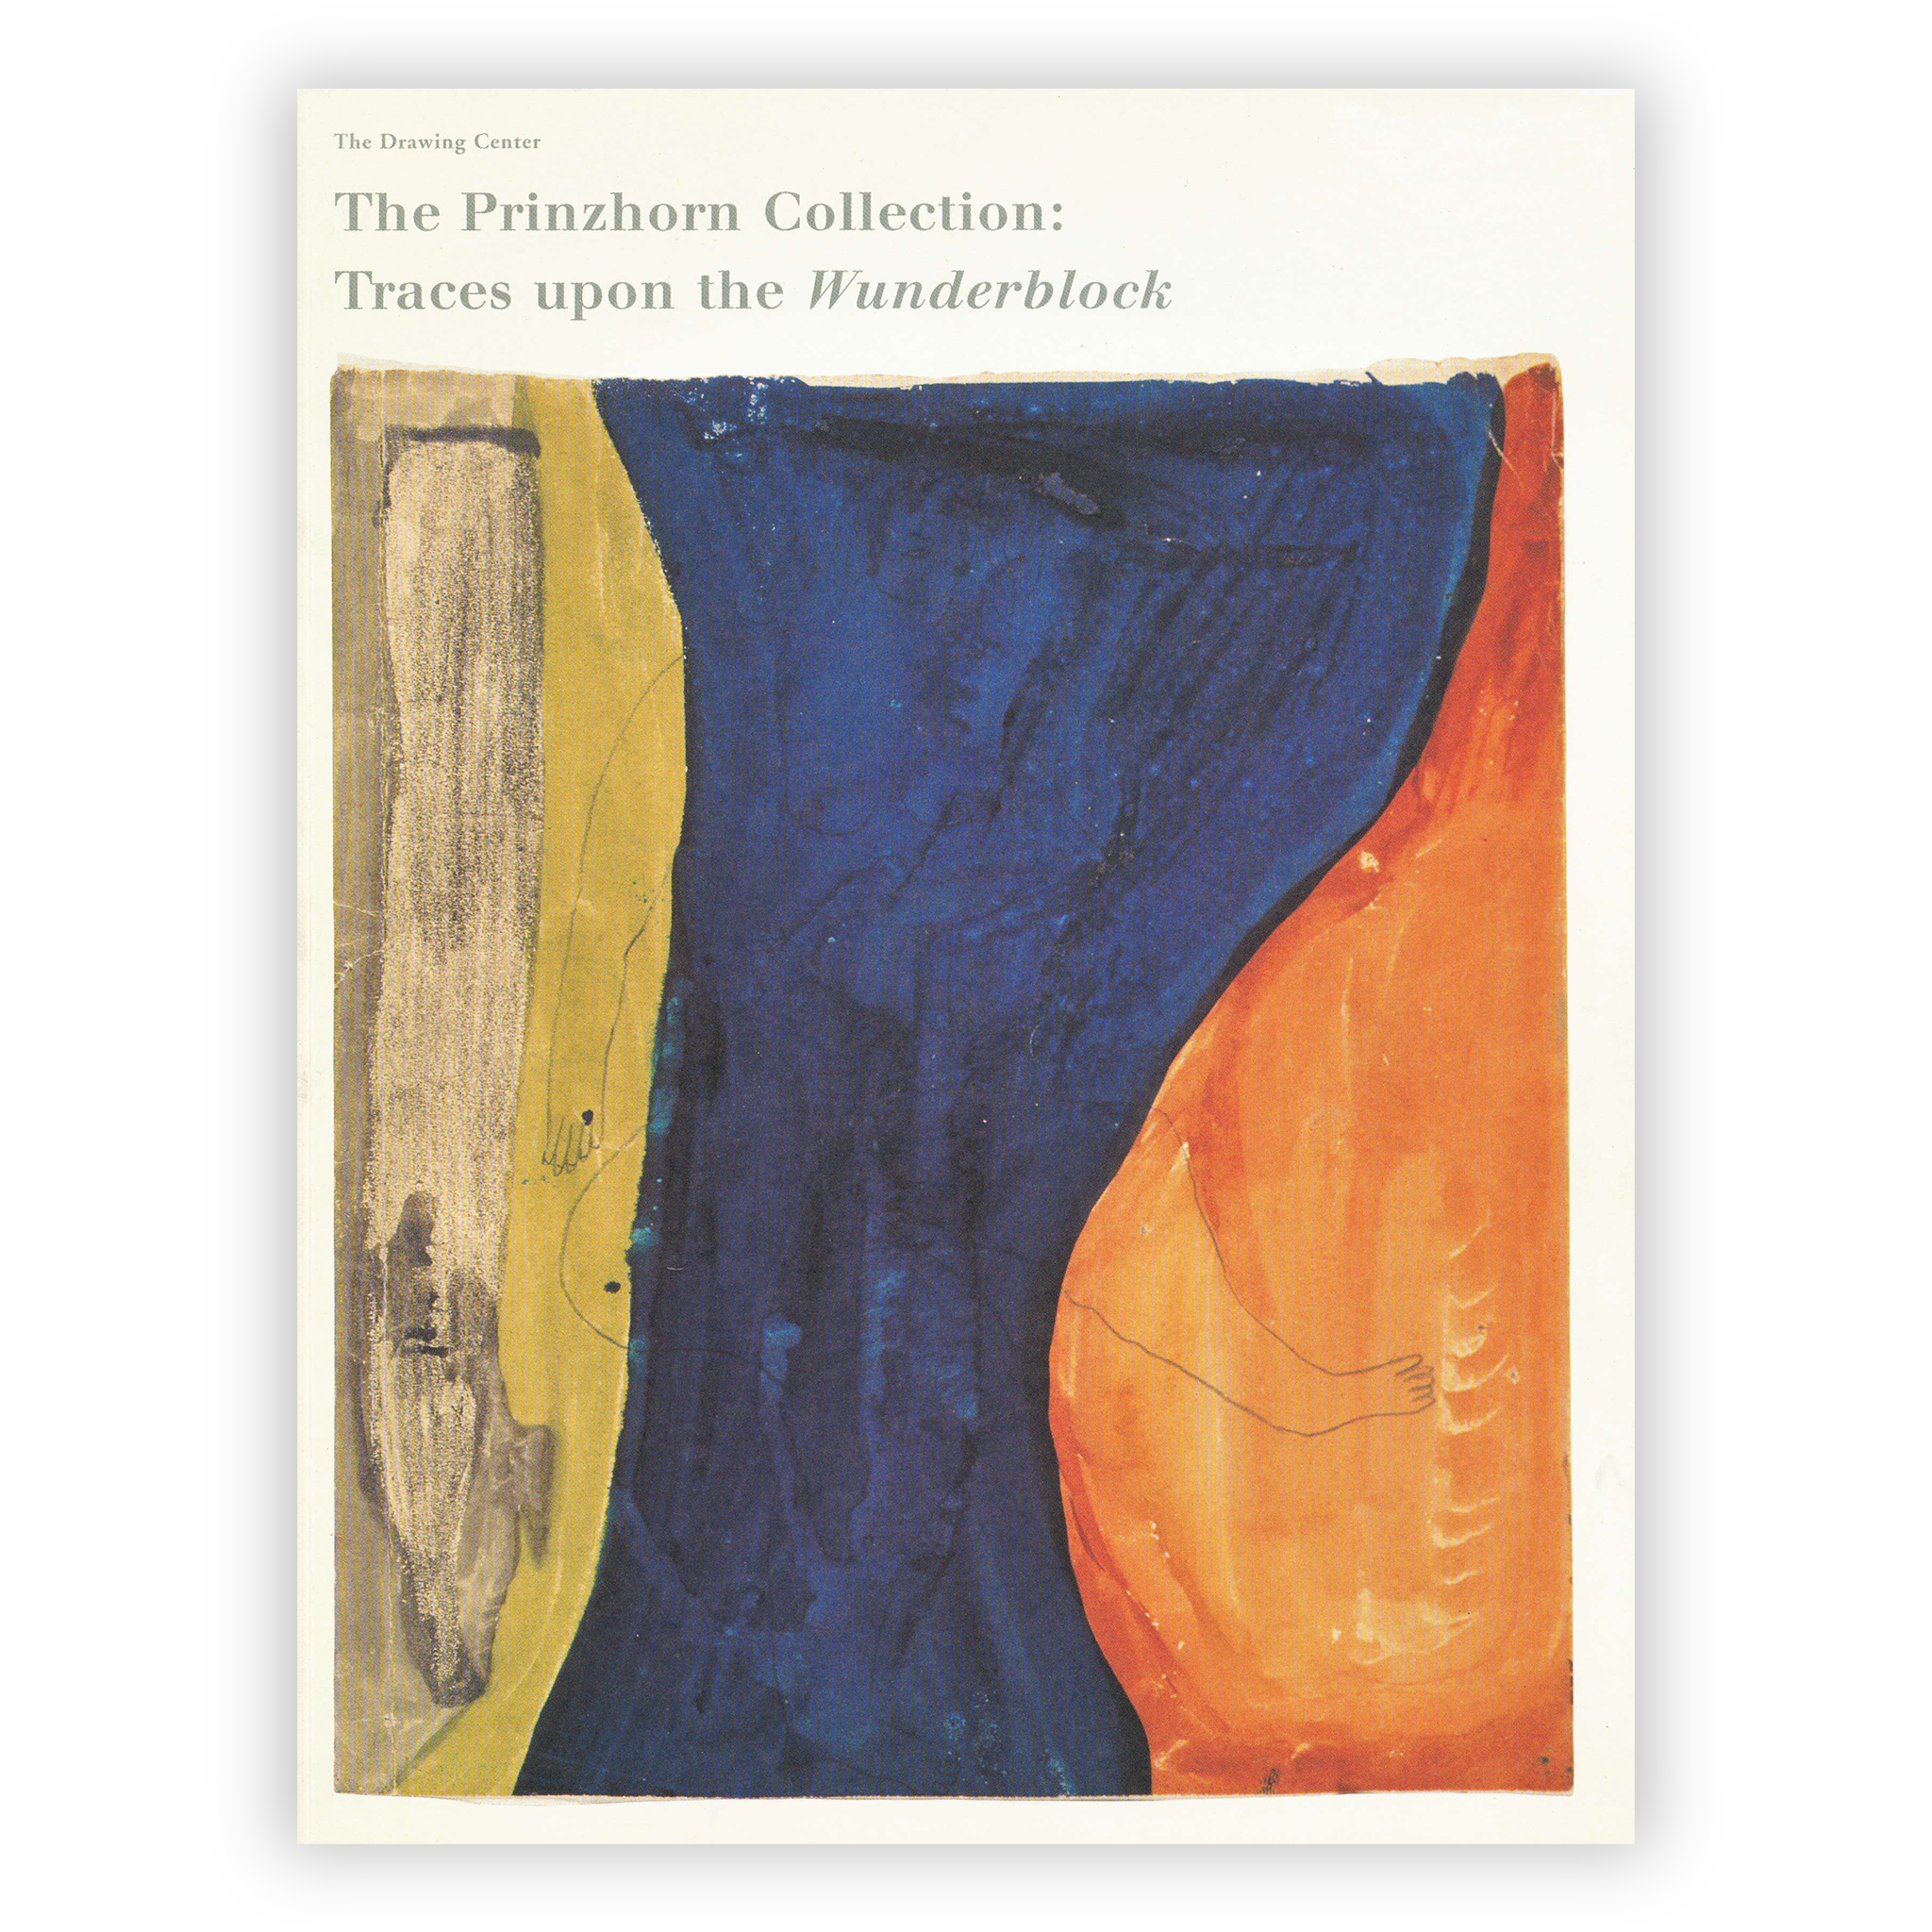 Front cover for "The Prinzhorn Collection: Traces Upon the Wunderblock"